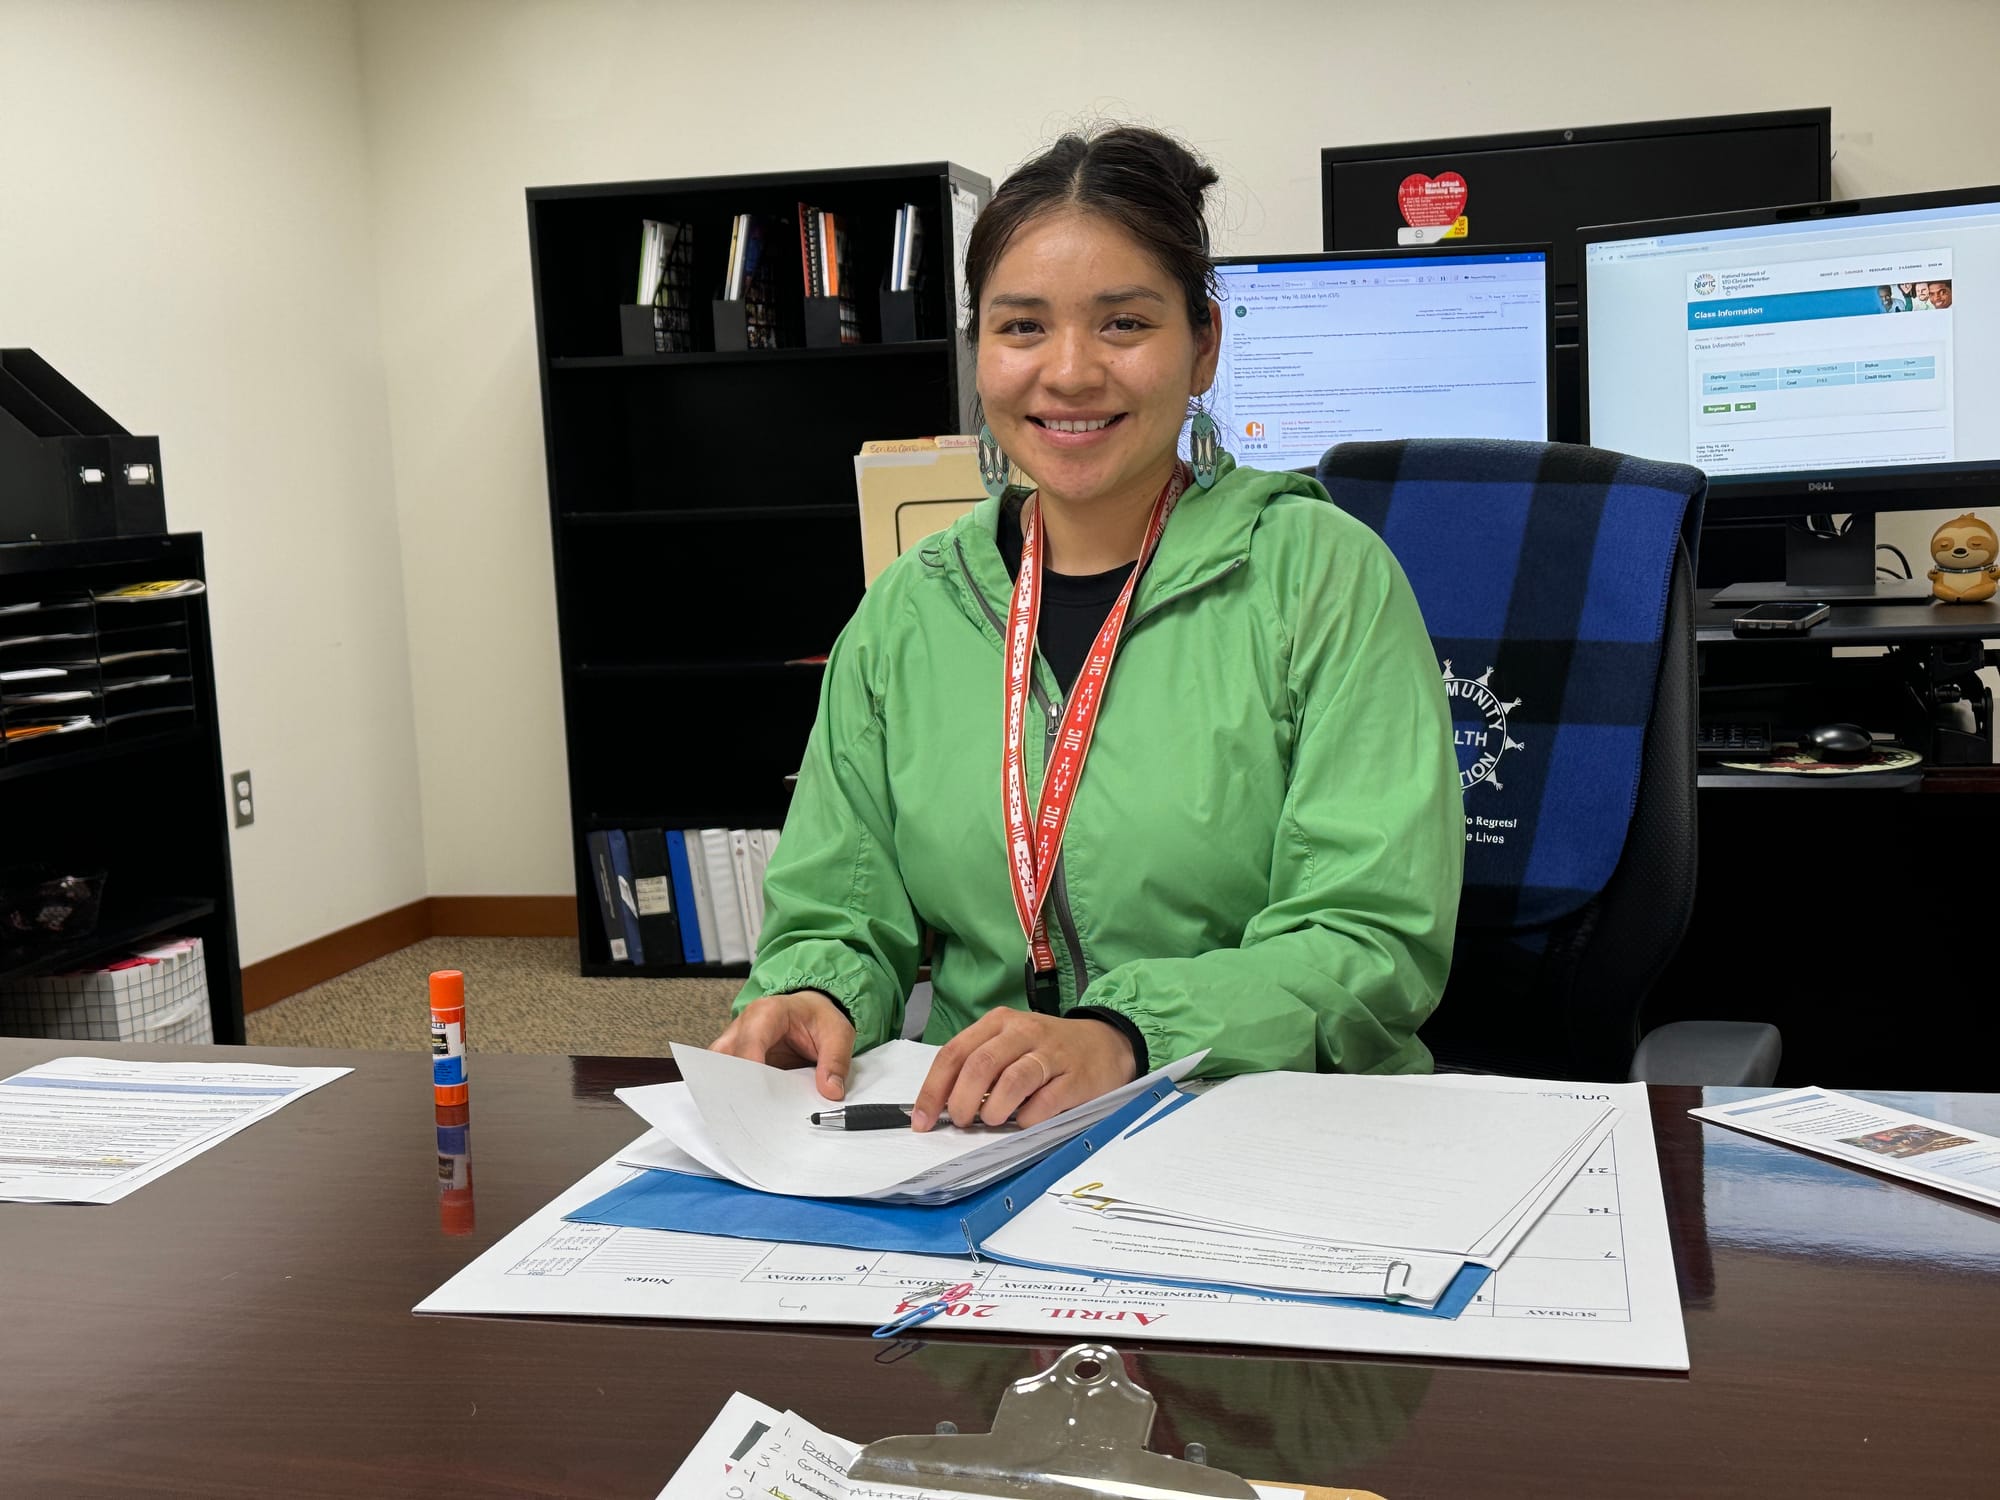 Wahleah Watson is a health education coordinator for the Sisseton-Wahpeton Oyate tribe